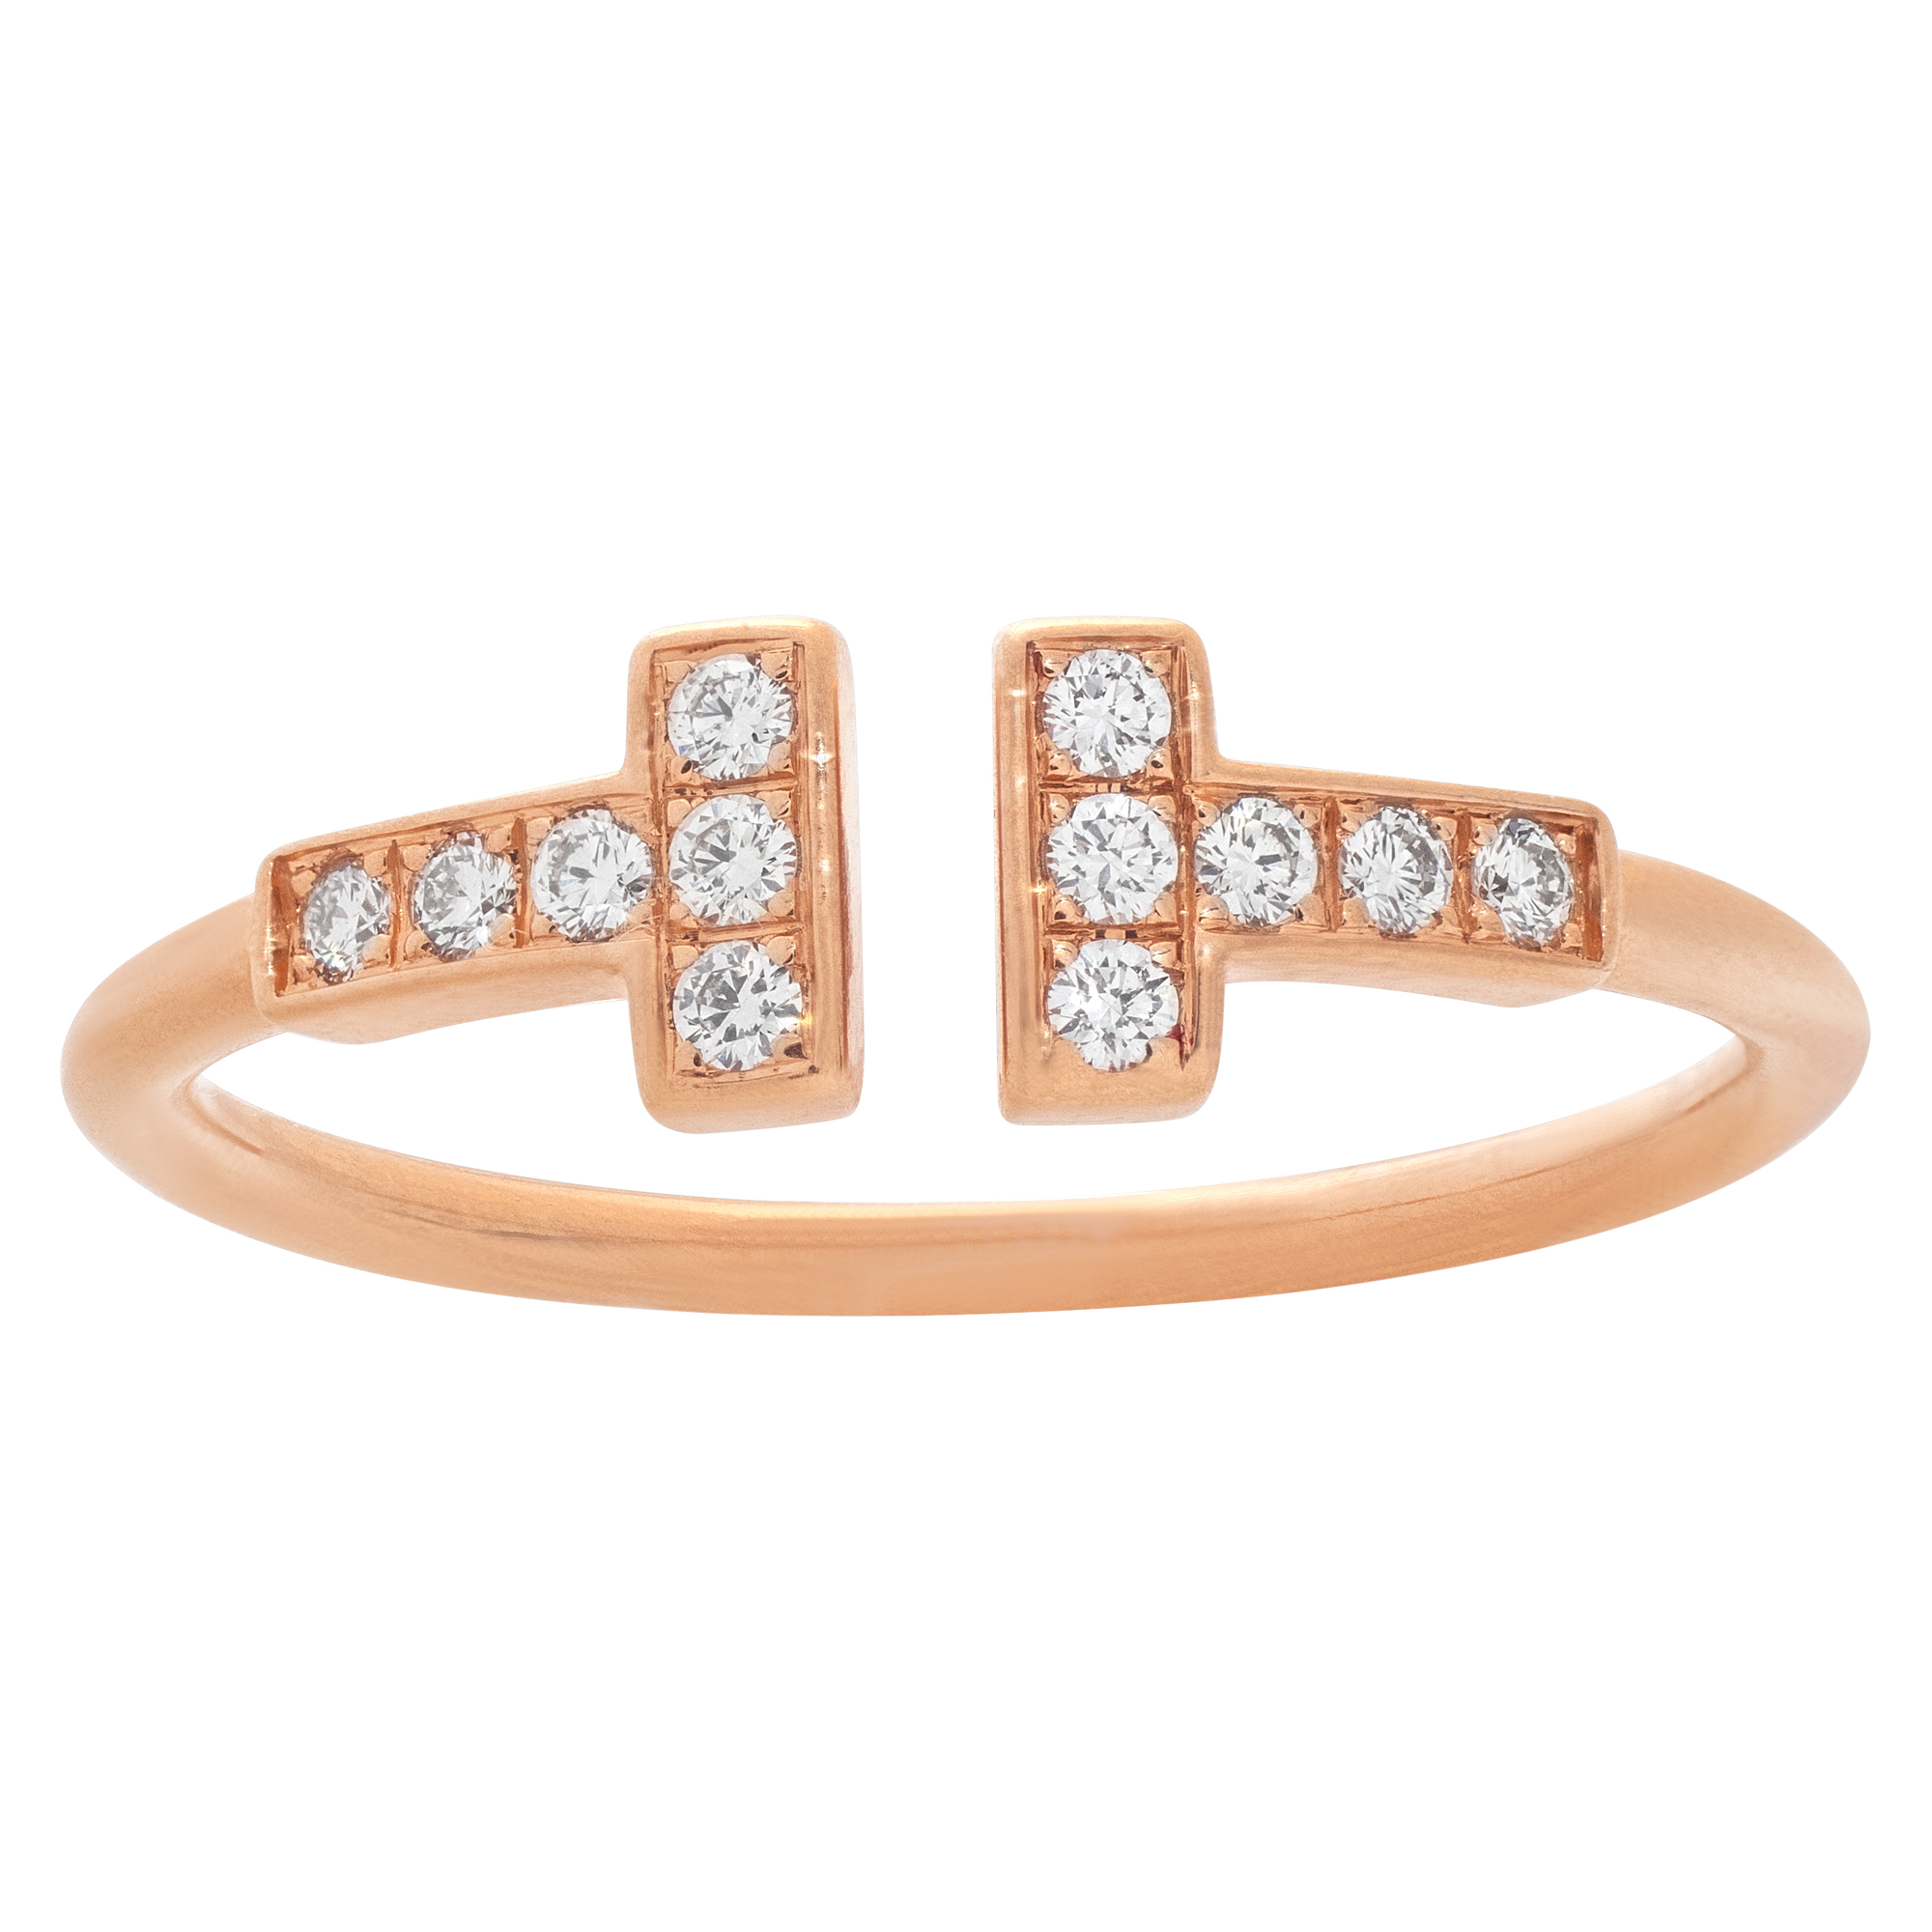 Tiffany & Co. Wire ring in 18k rose gold image 1